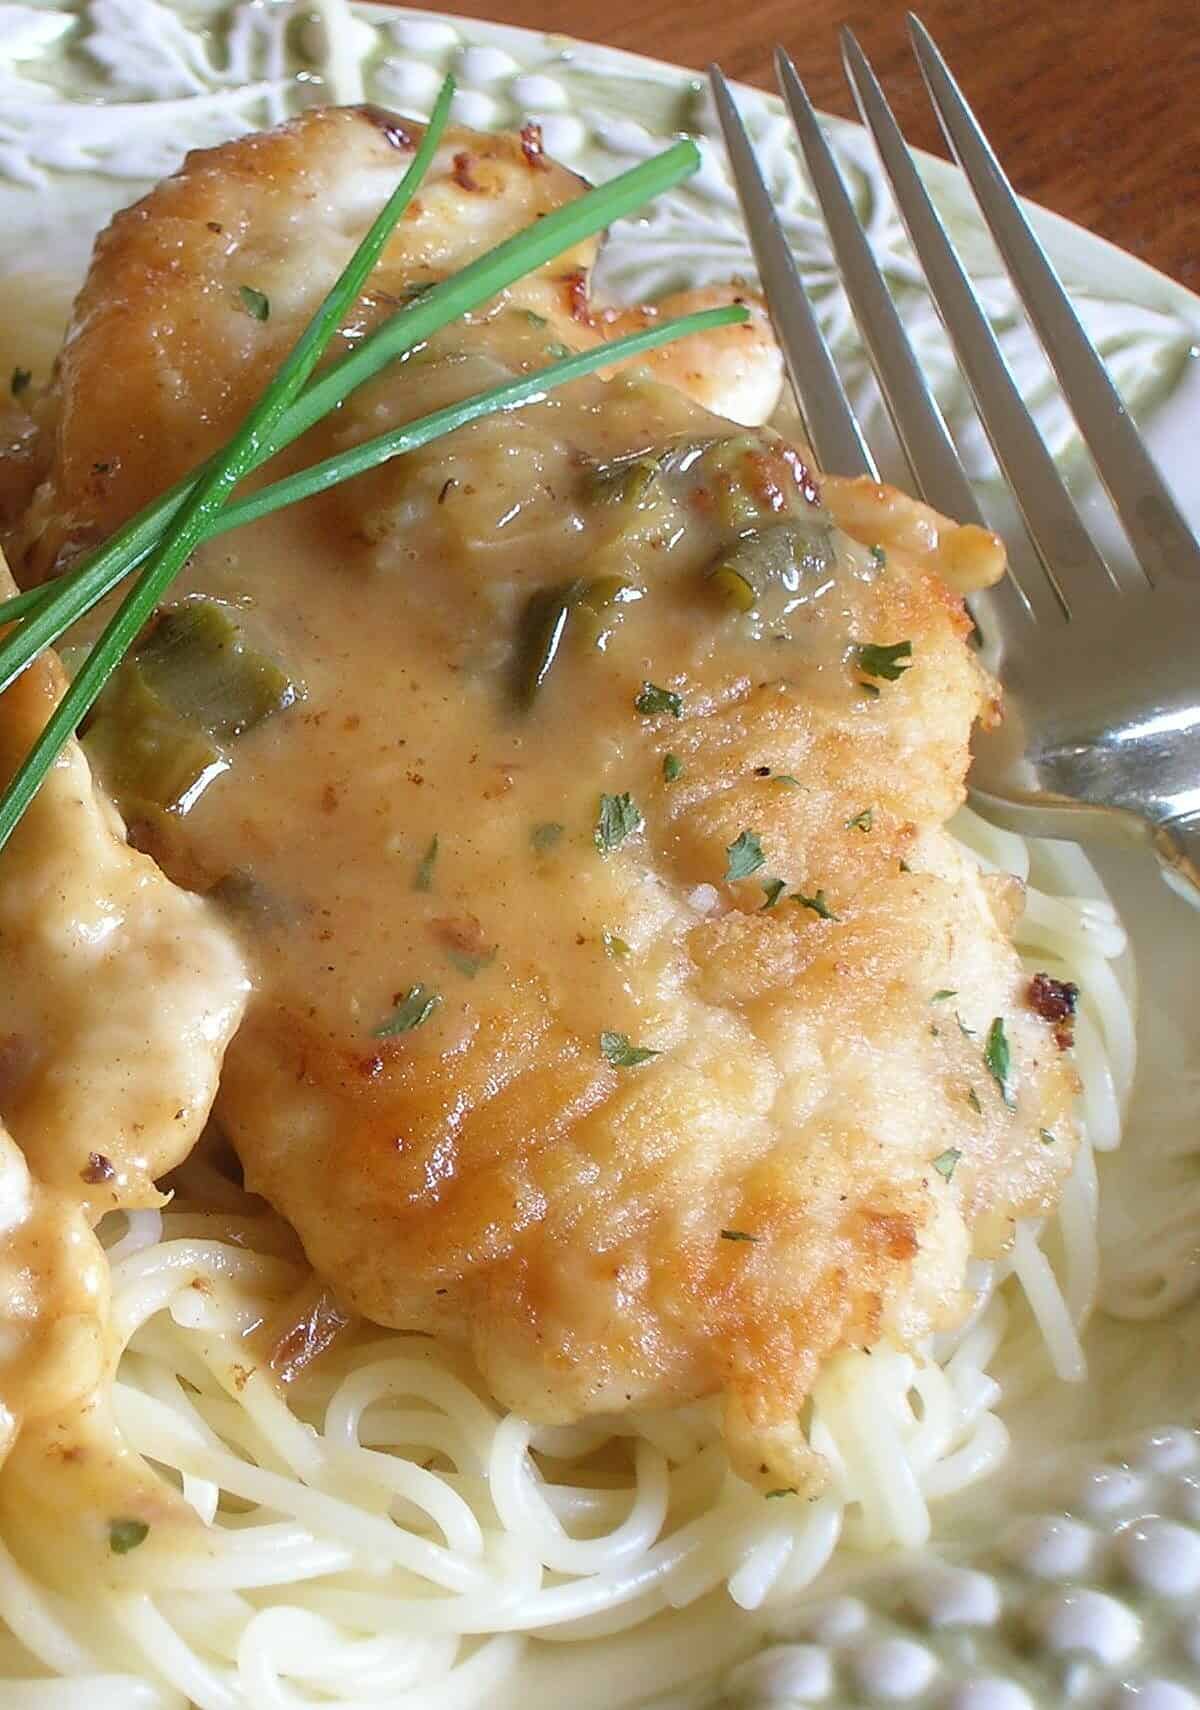  Tantalize your taste buds with this Lemon Chicken goodness.